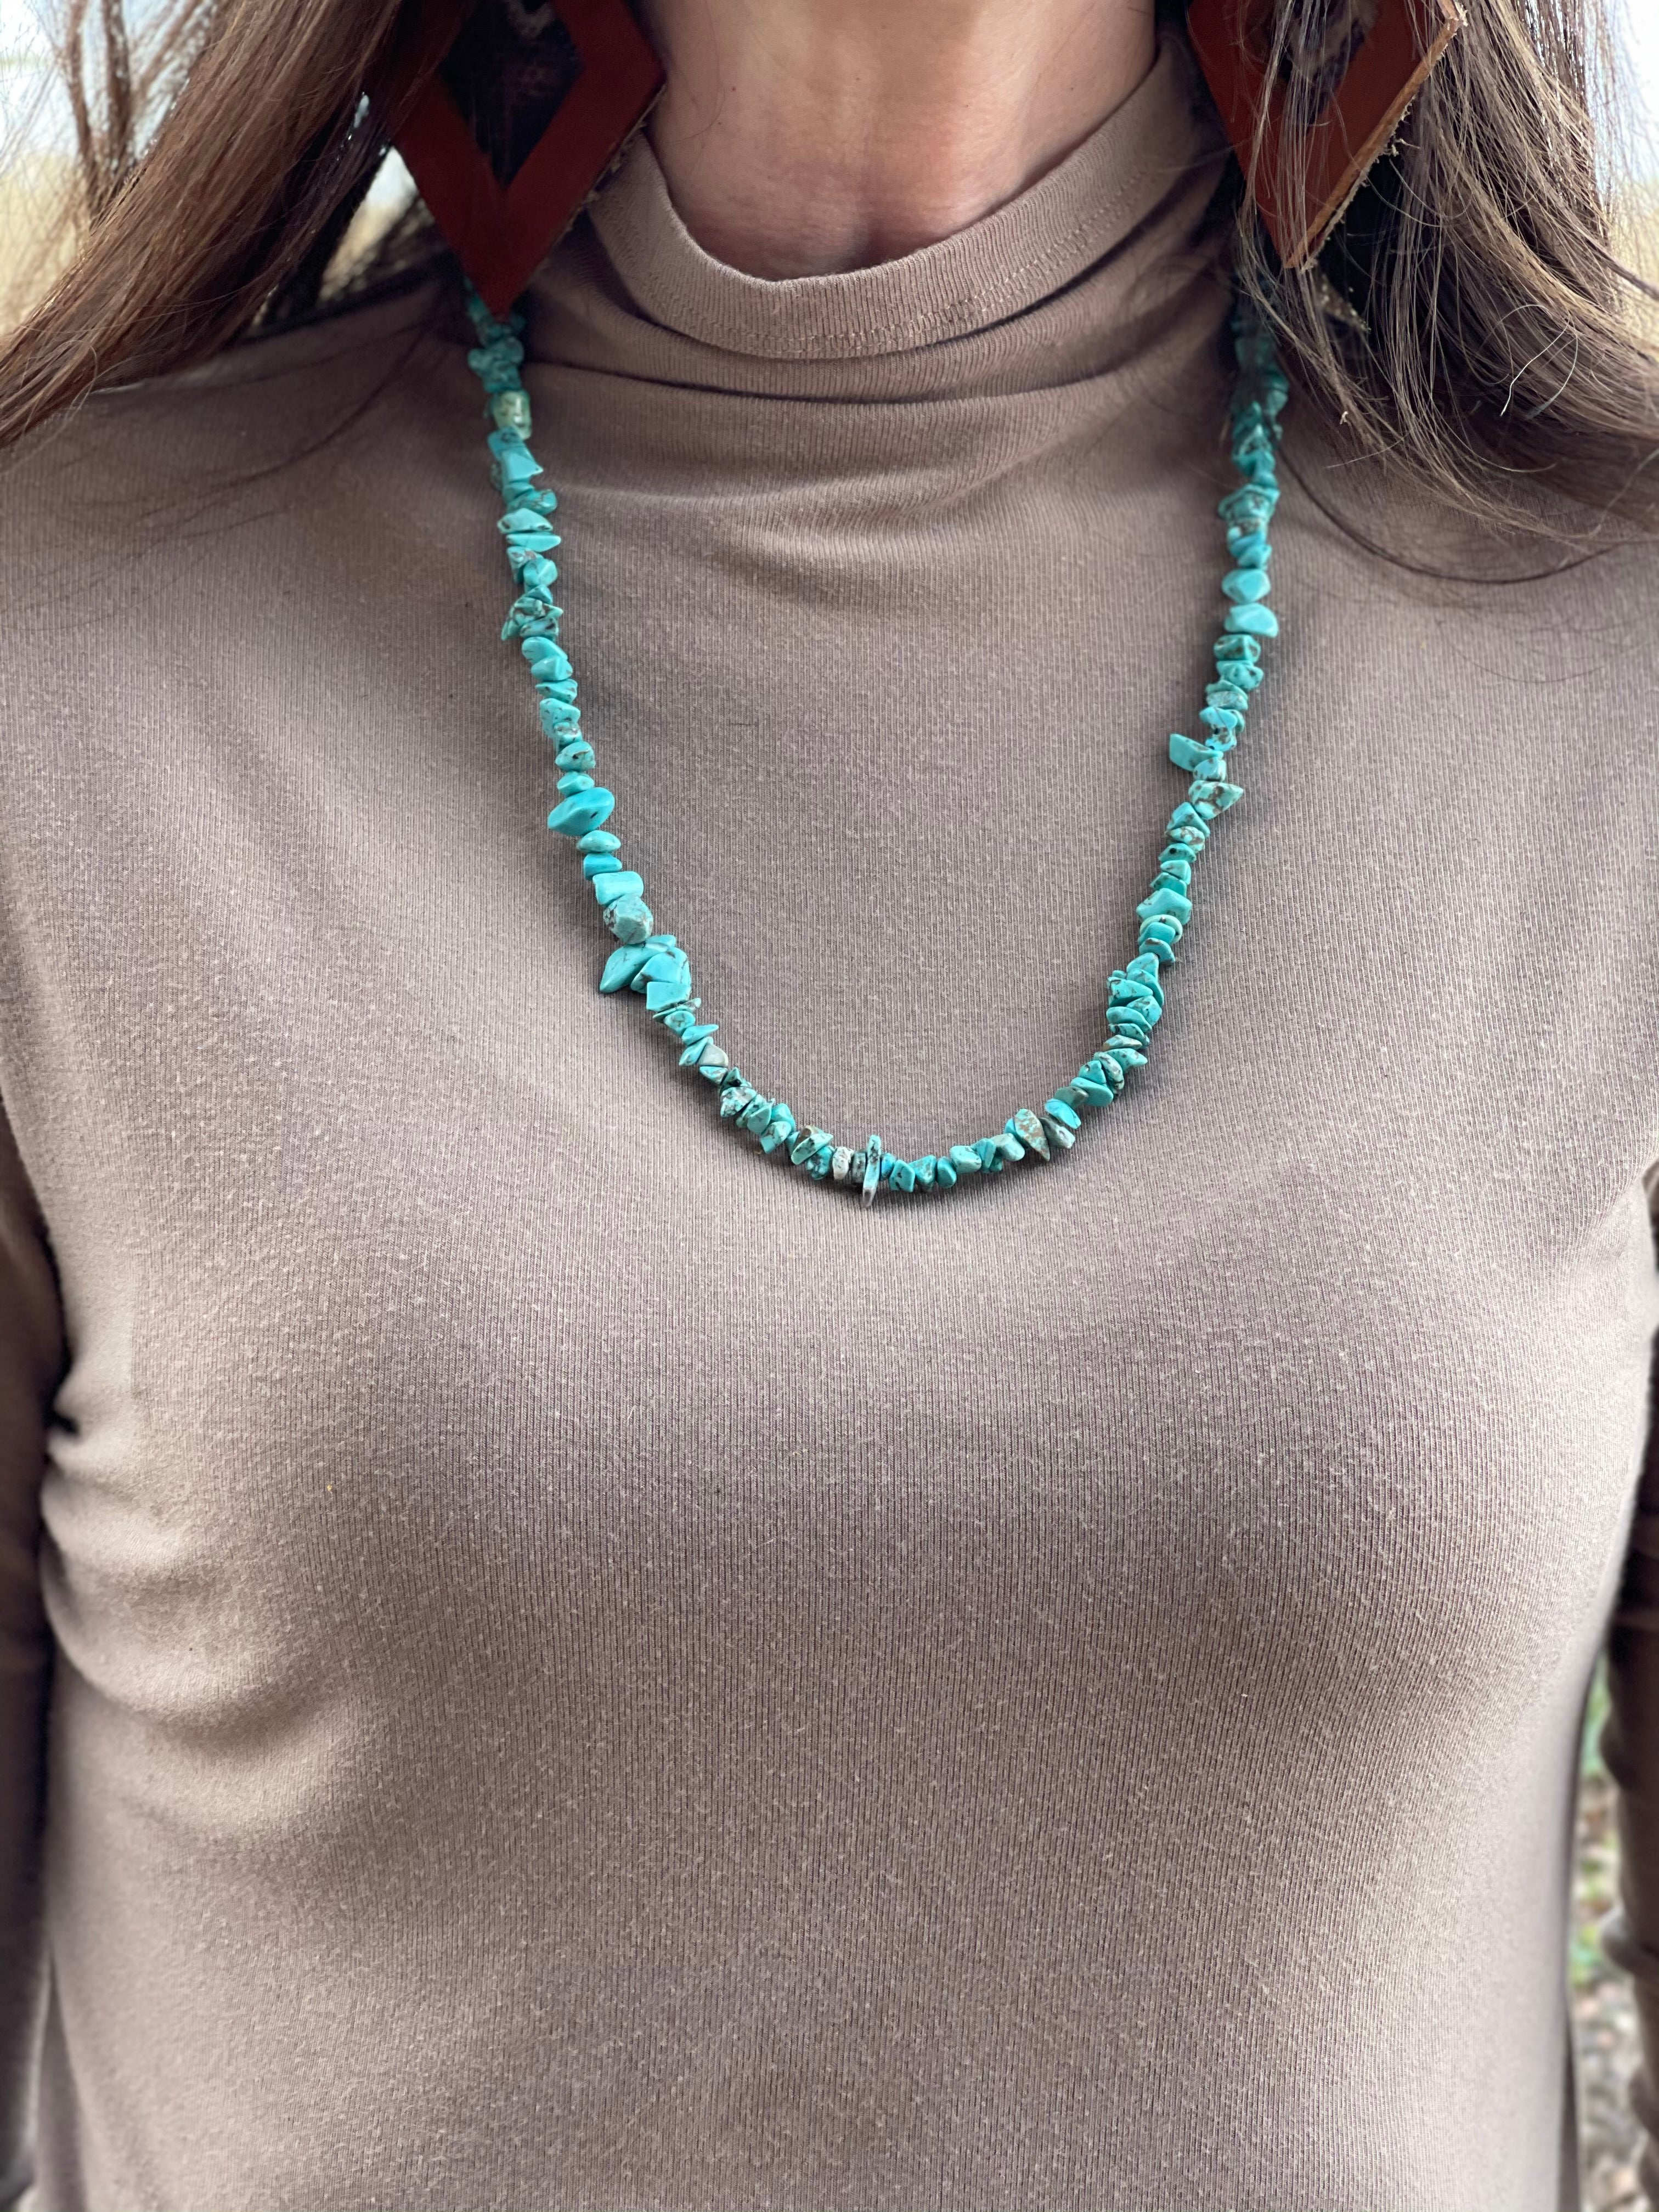 The Nola turquoise necklace